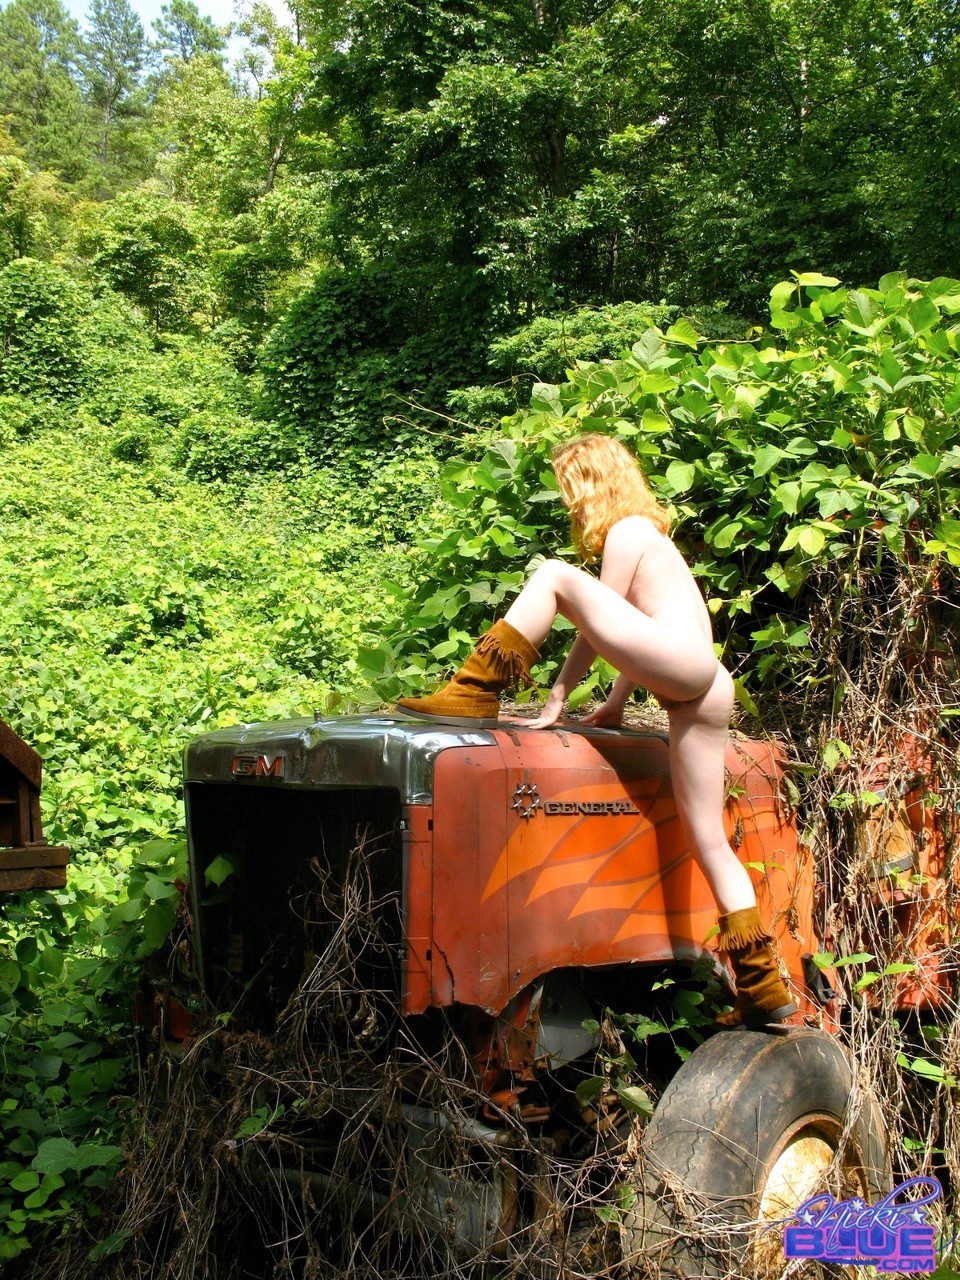 Amateur babe in boots Nicki Blue strips and poses on a tractor in the forest 포르노 사진 #424040516